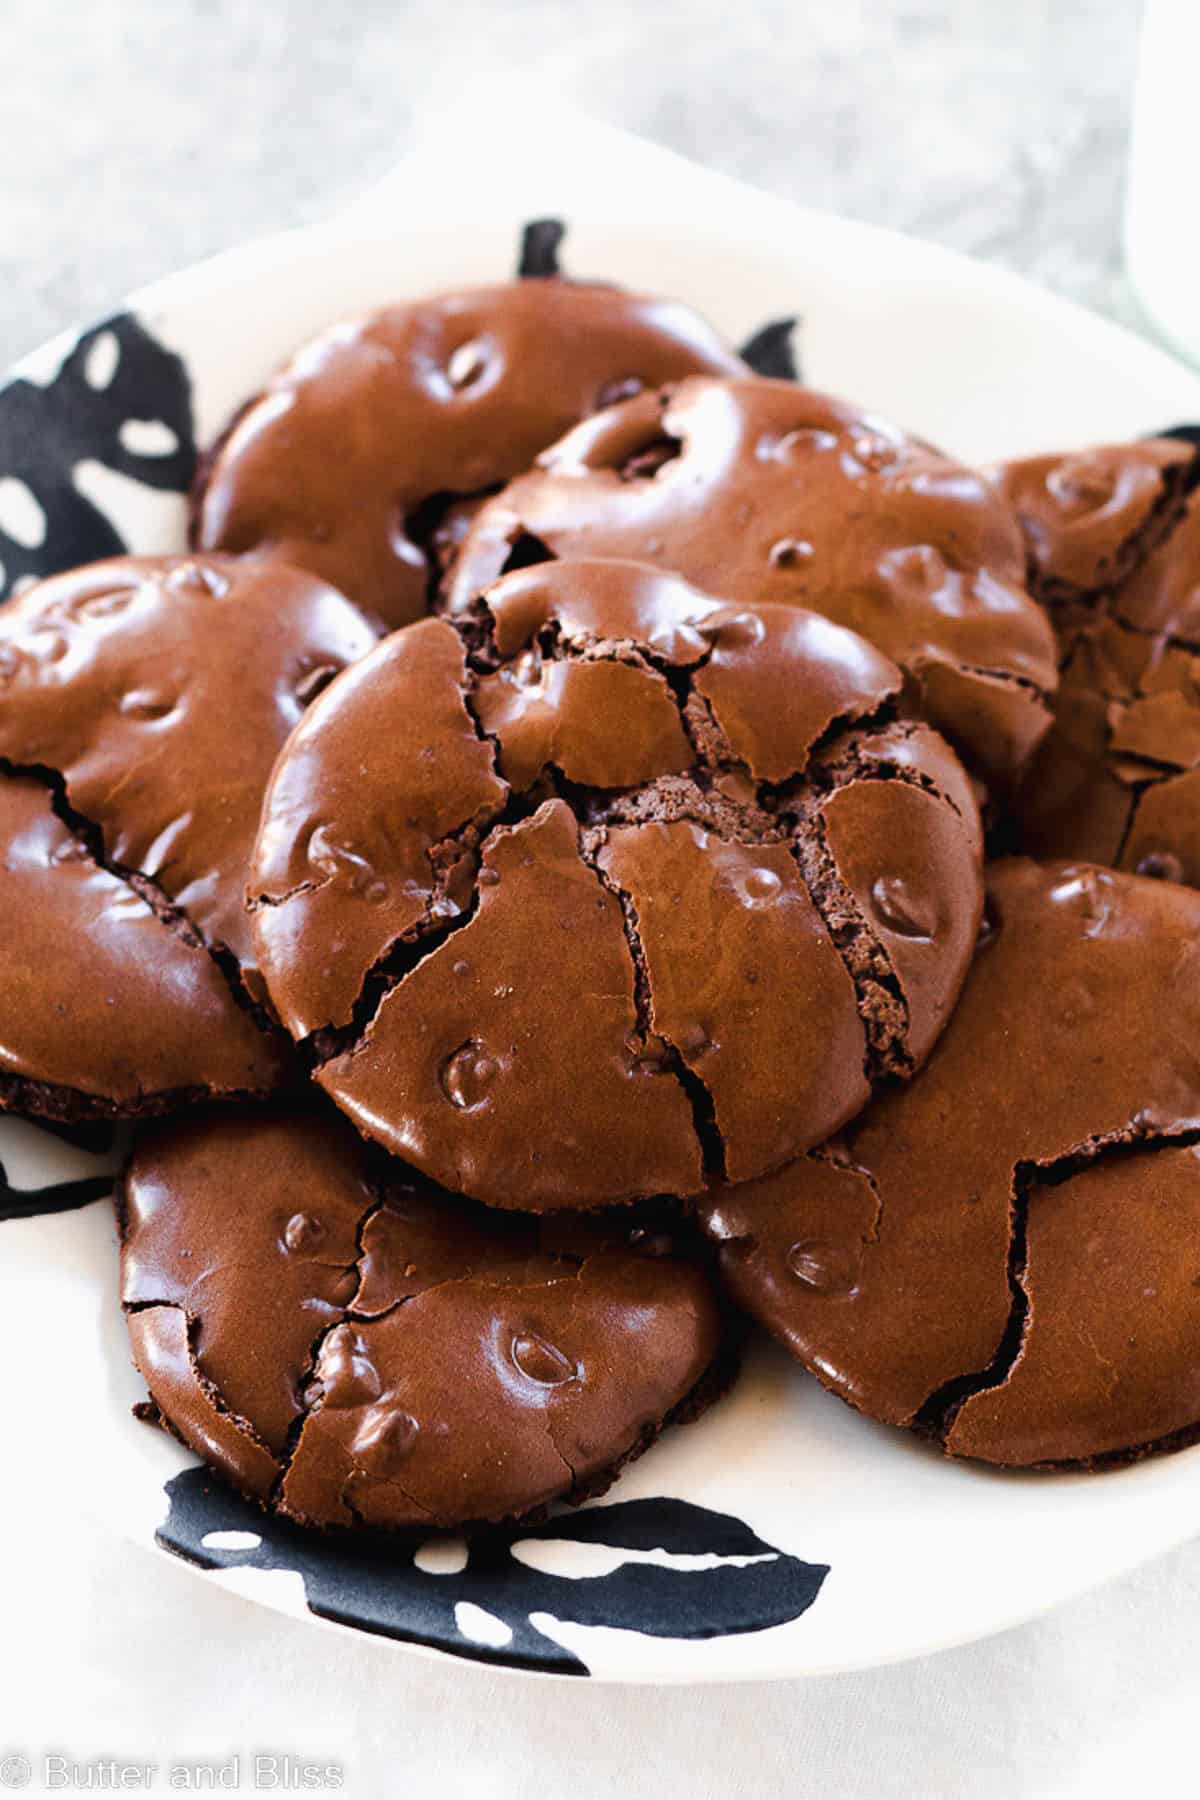 Flourless chocolate cookies stacked on a plate.